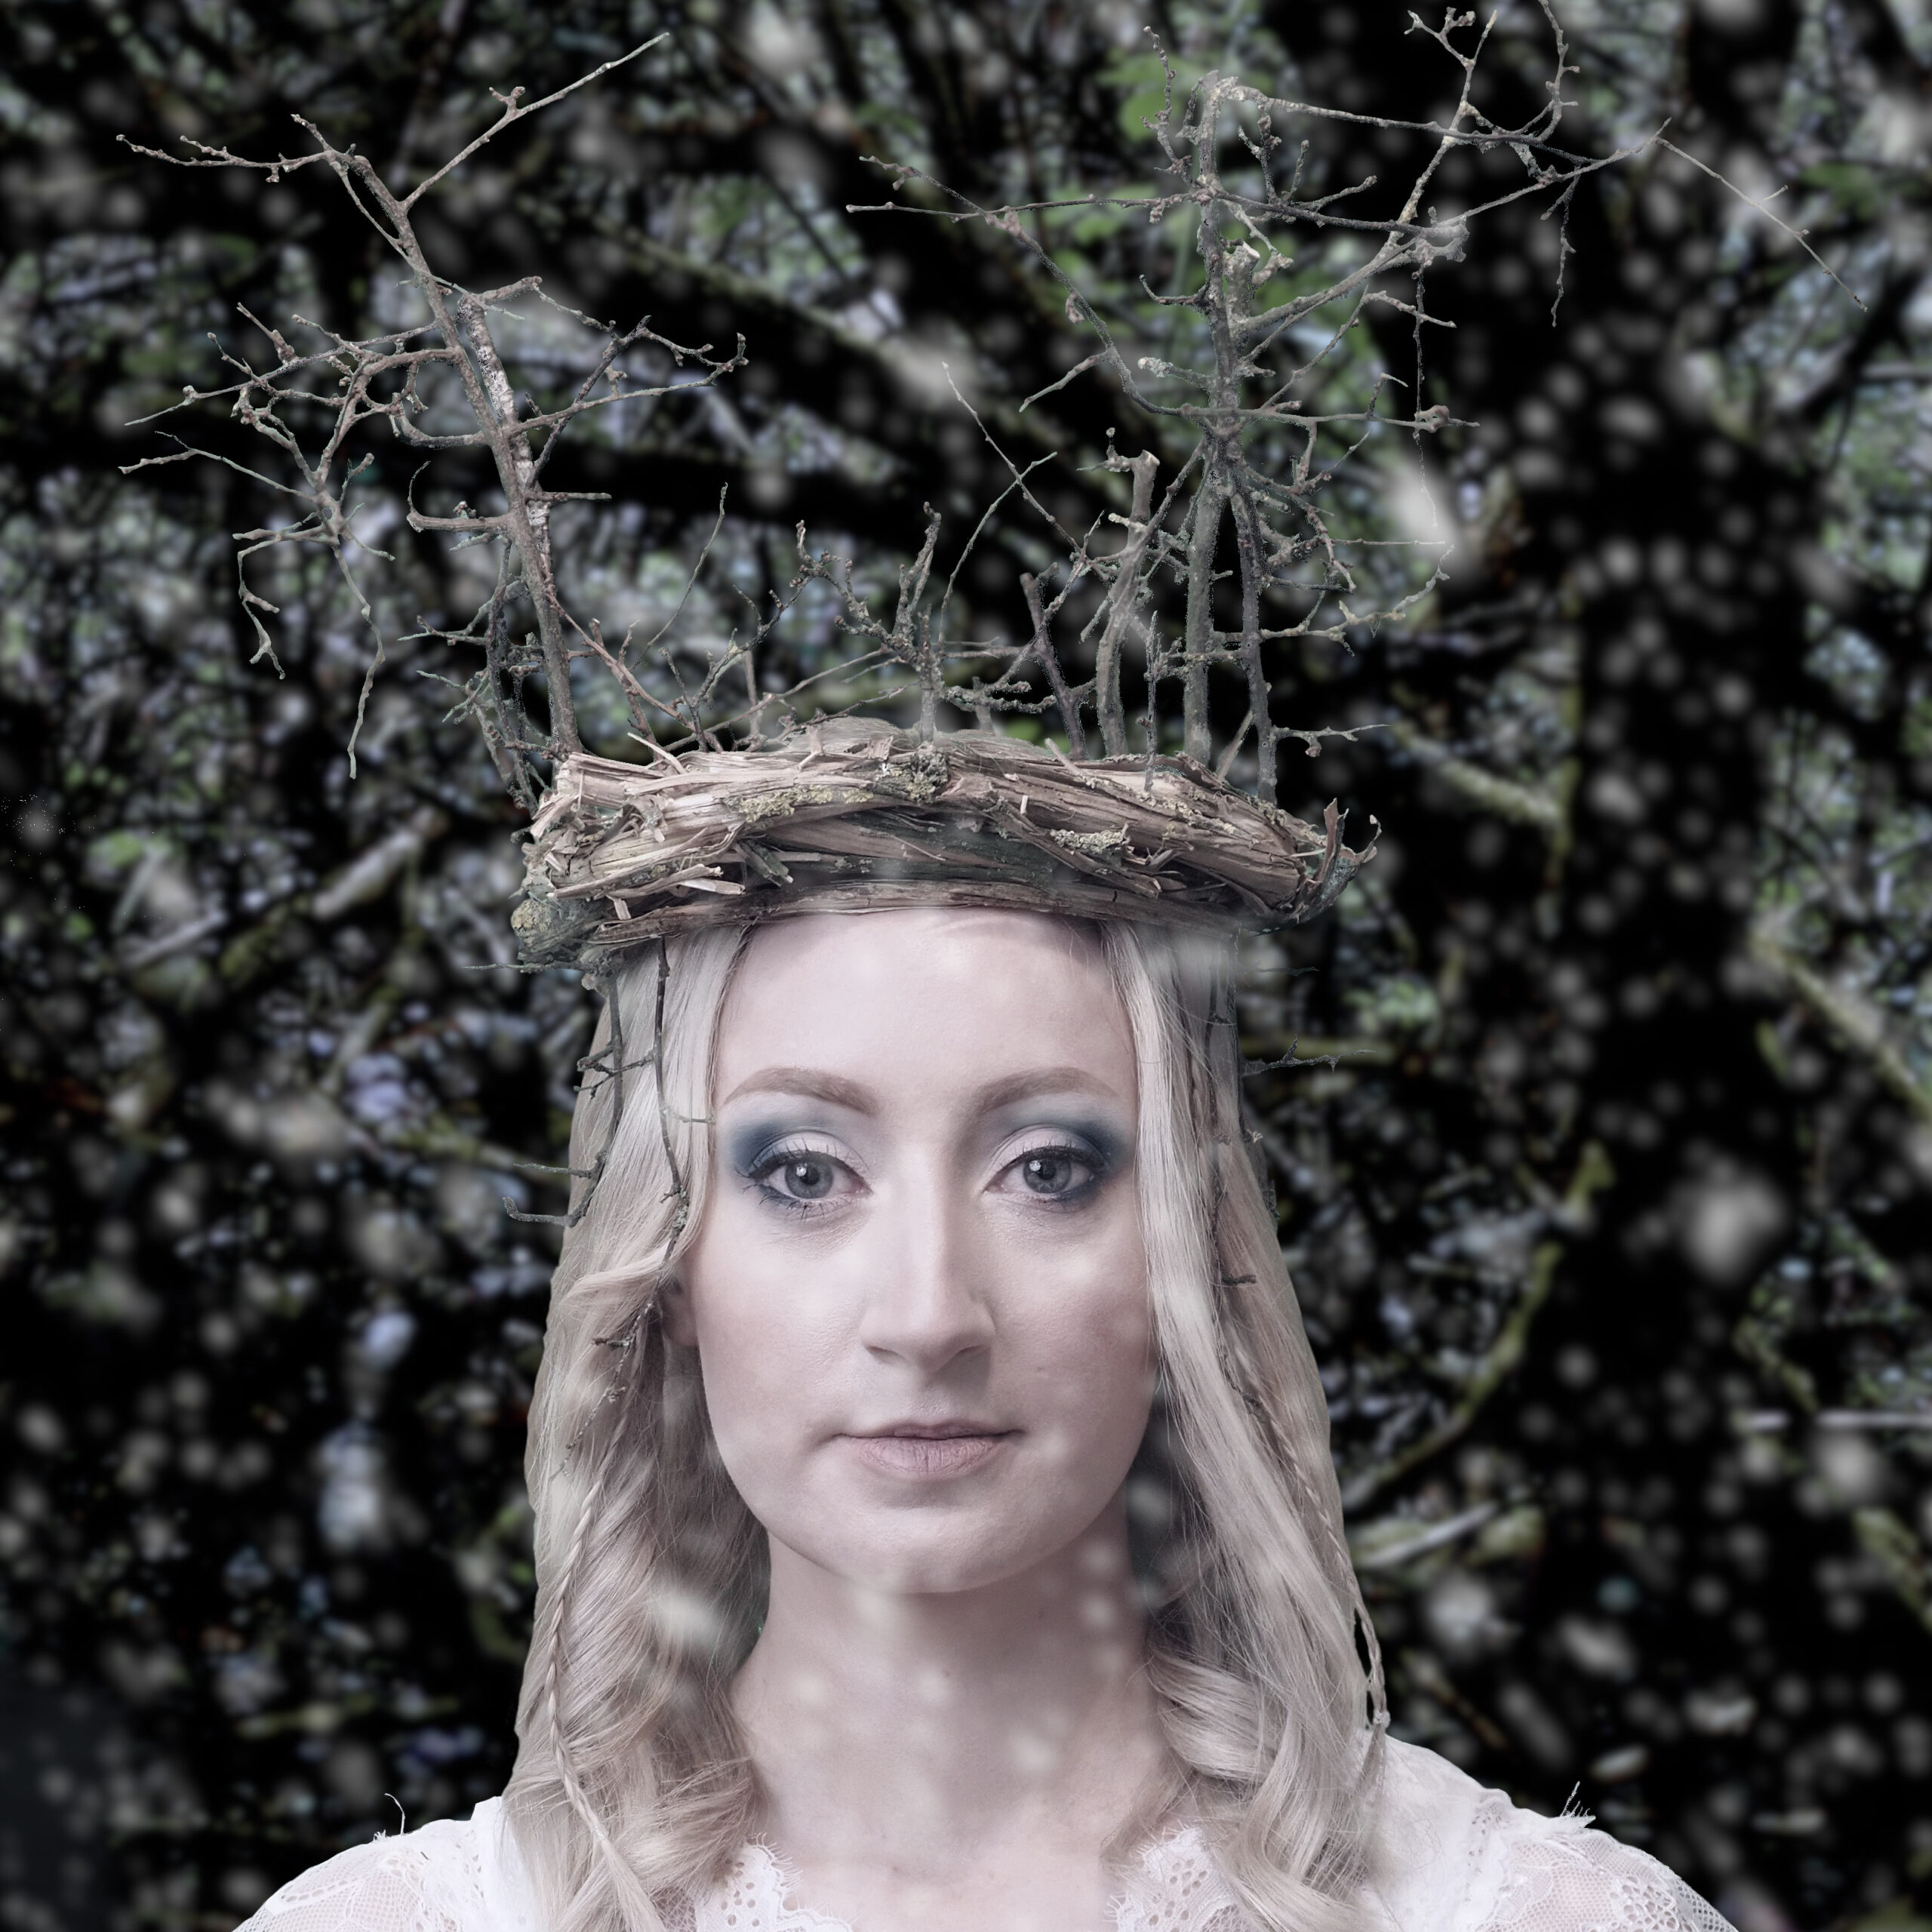 Creative portrait of a young woman with a crown of twigs. Wintery background with falling snow.